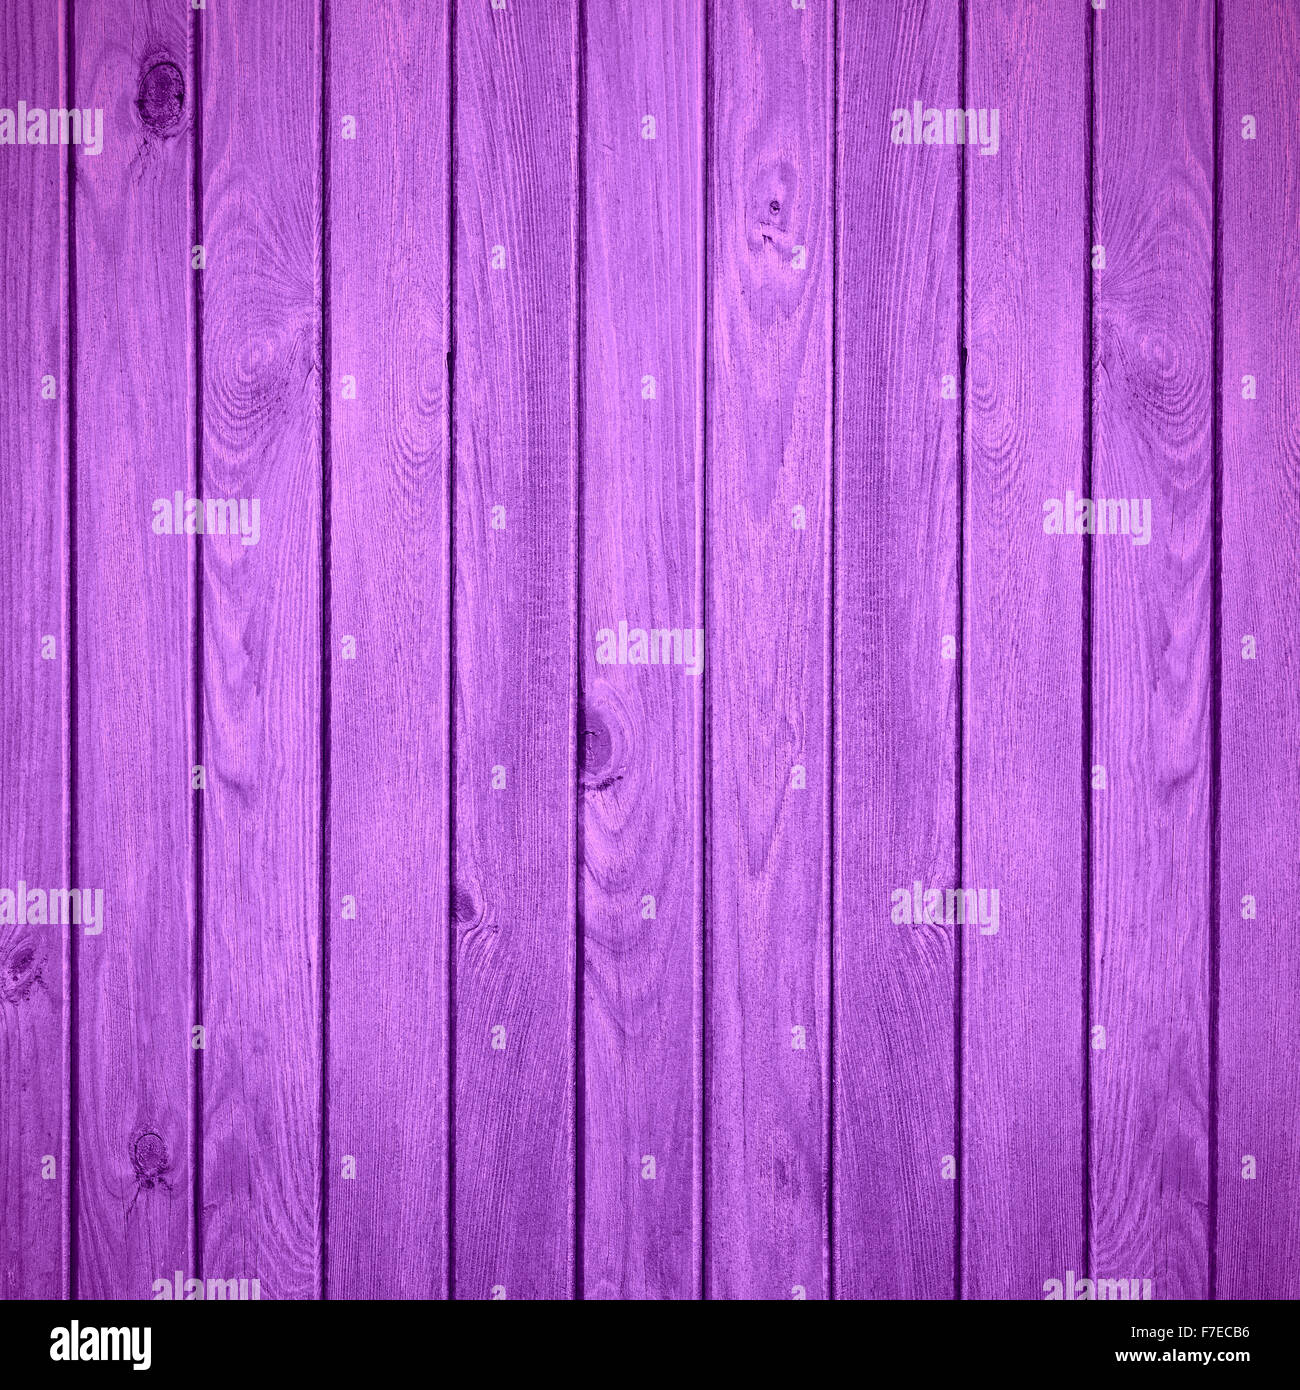 pink wooden rustic background or wood grain texture Stock Photo